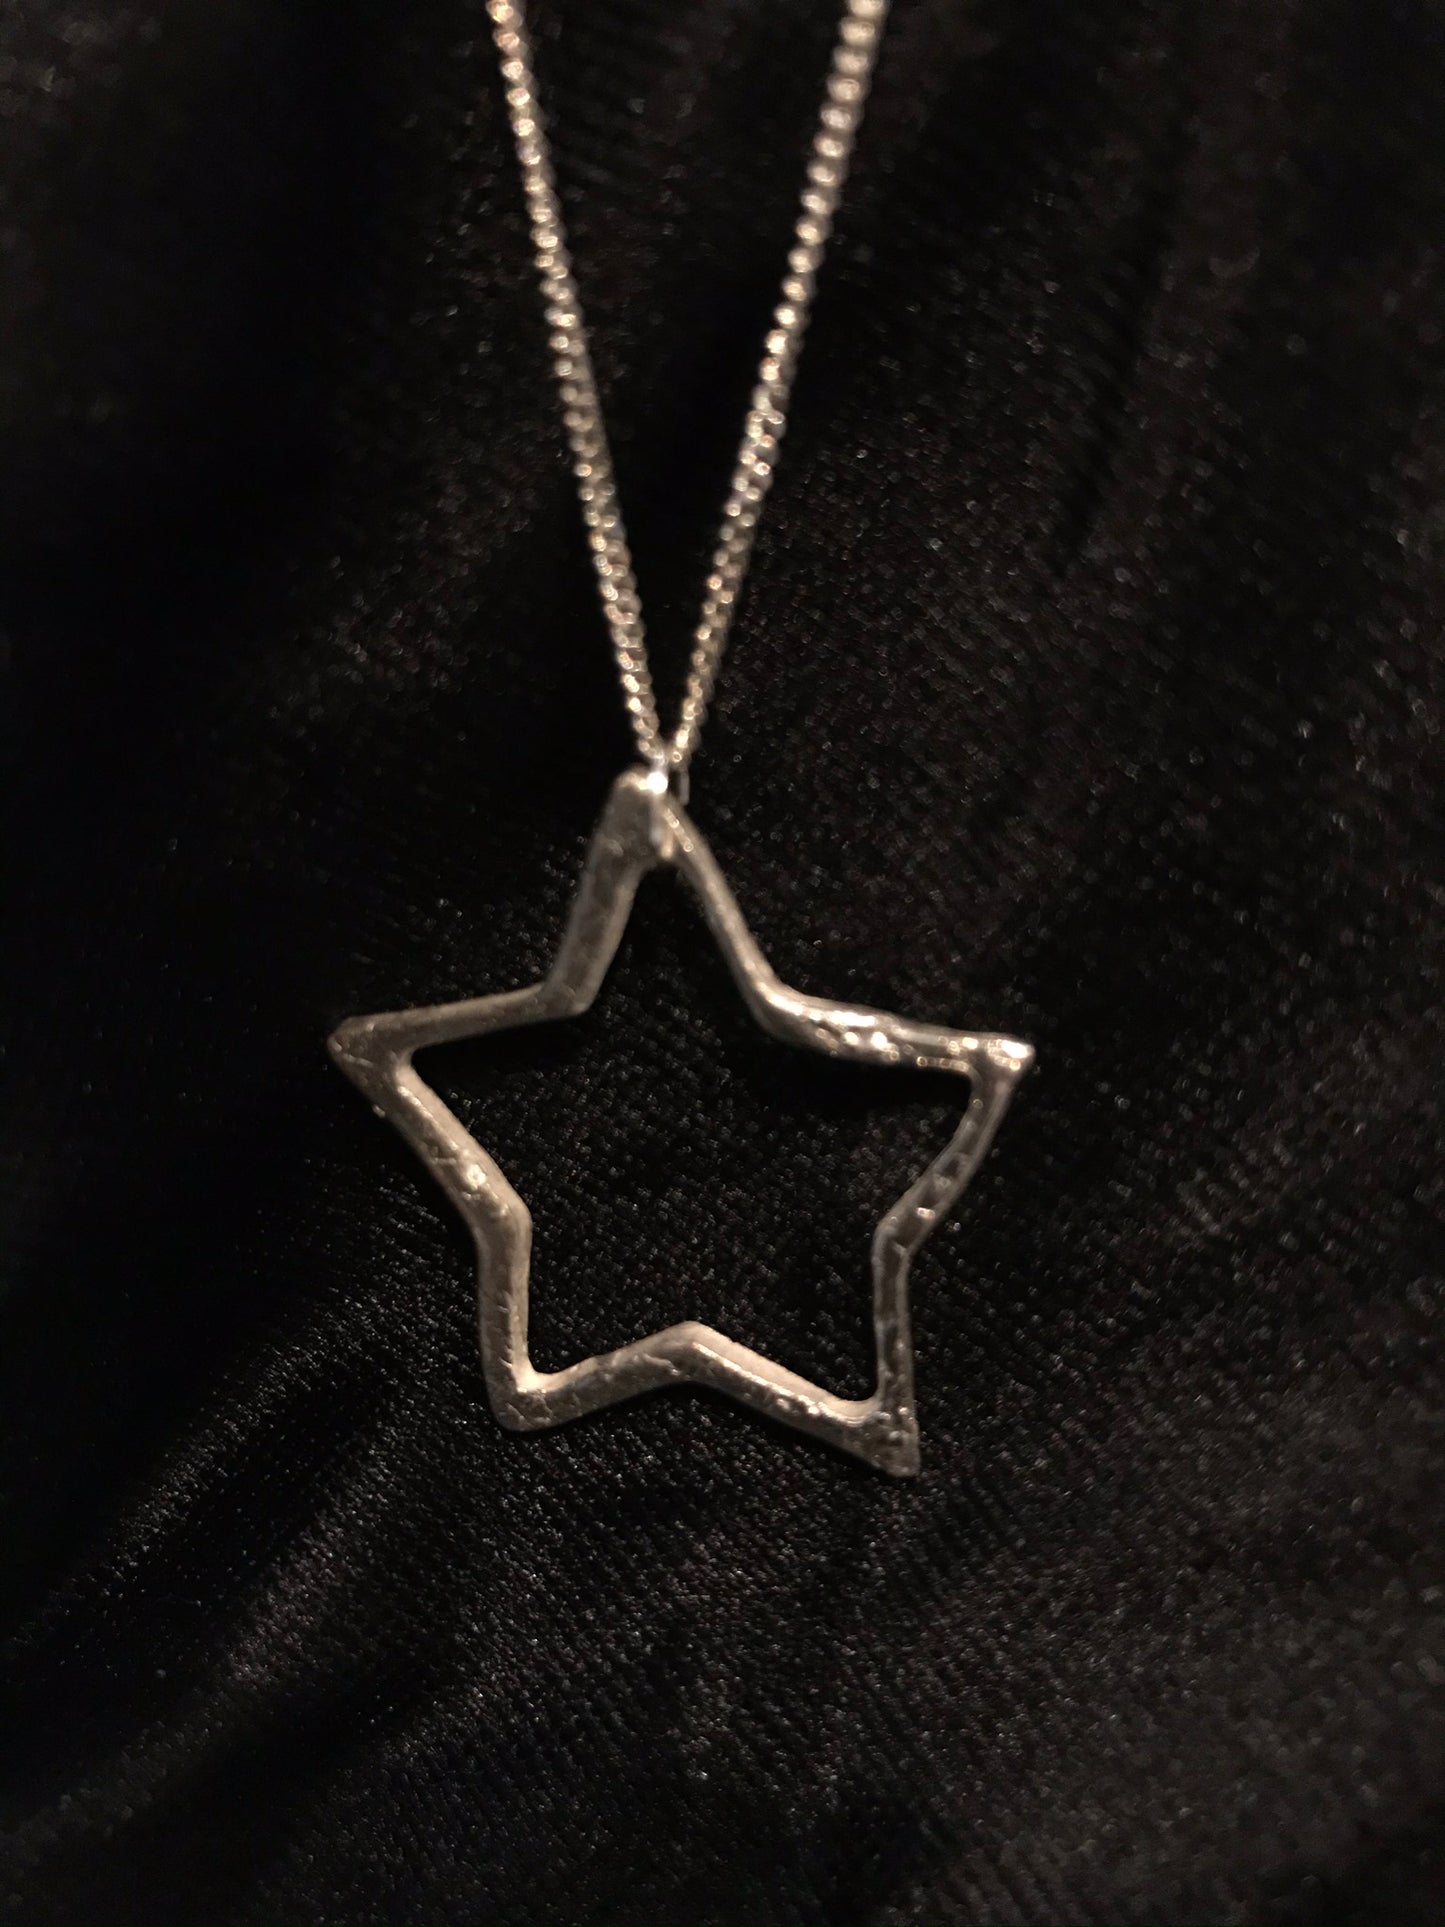 Silver star necklace